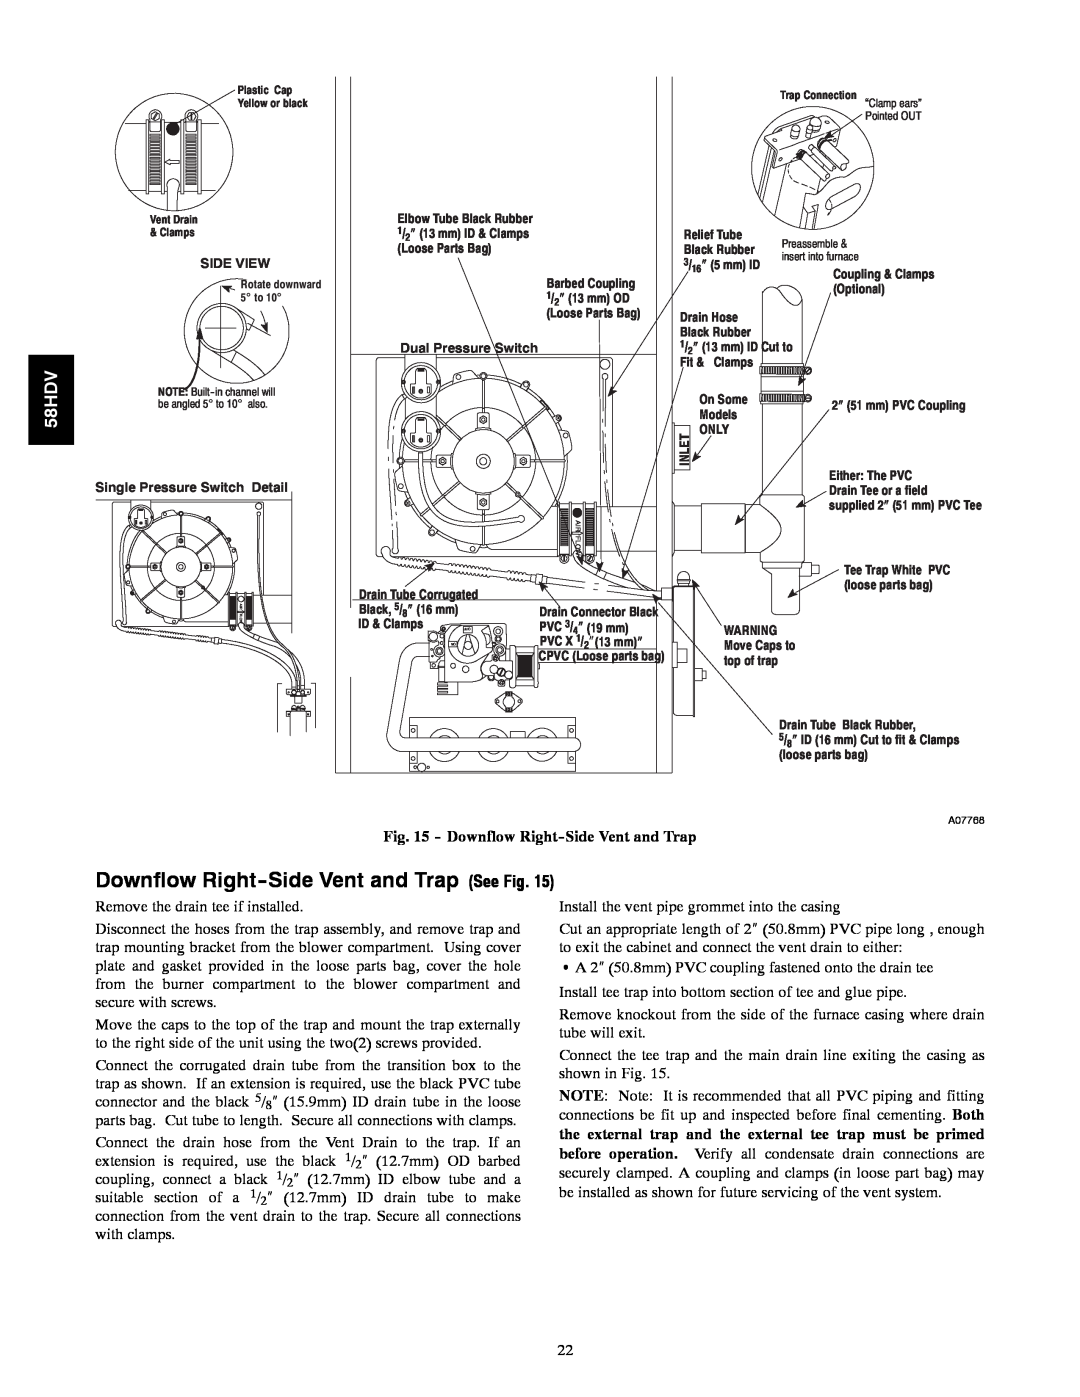 Carrier 58HDV installation instructions Downflow Right-SideVent and Trap See Fig 